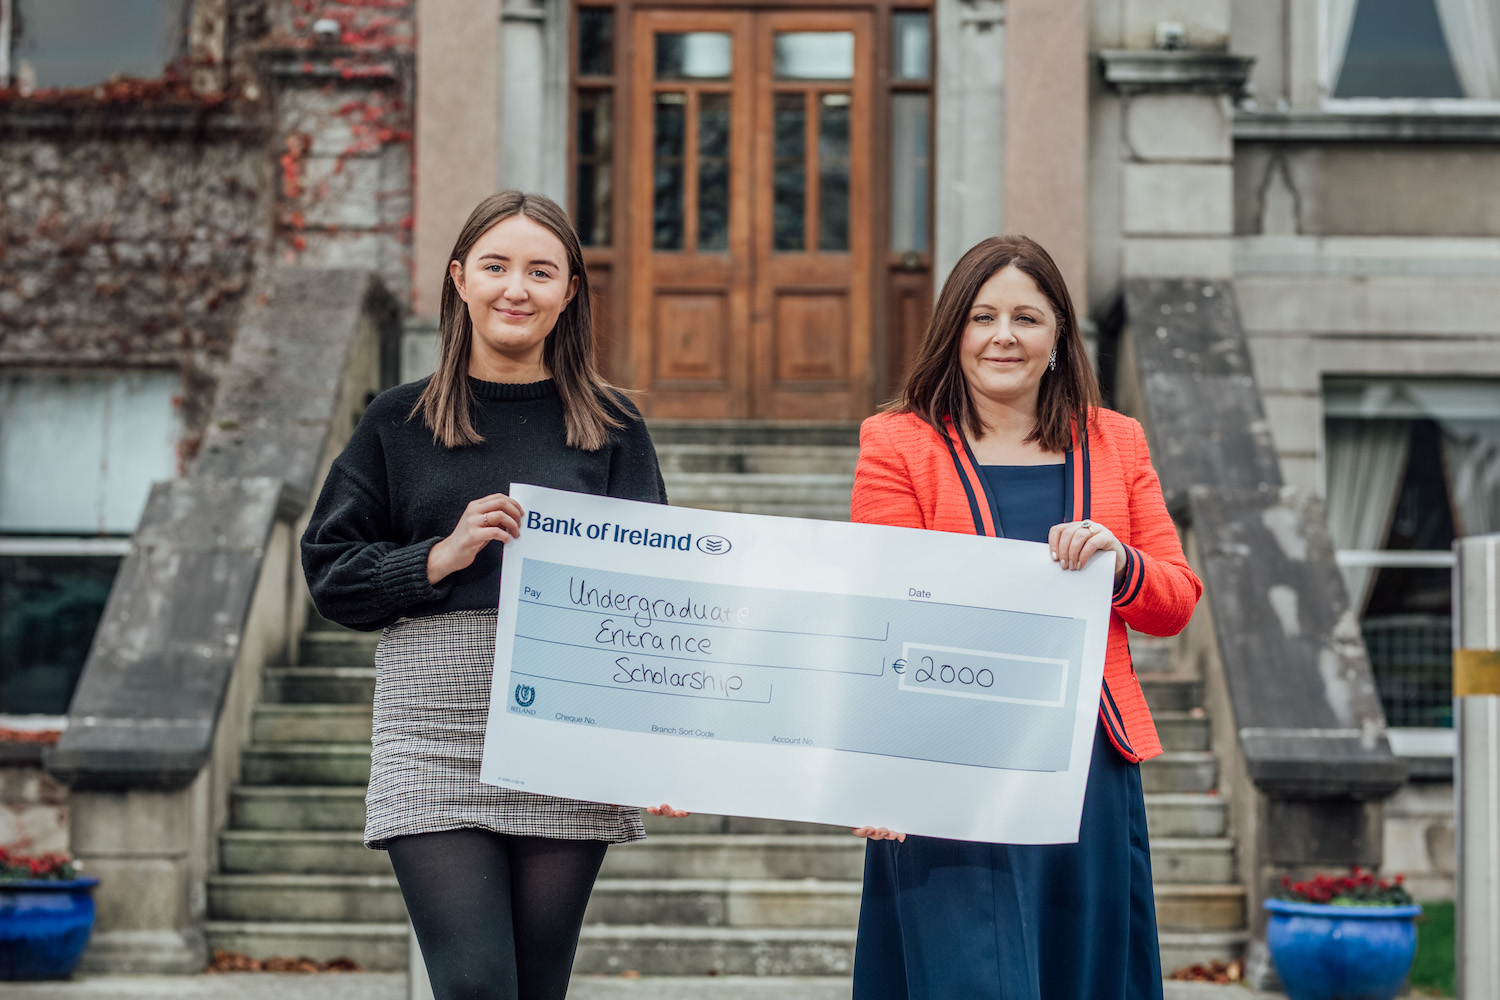 MIC Entrance Scholarship 2021 Pictured at Mary Immaculate College (MIC) was Sadhbh O’Leary from Ennis Road, Limerick, who received an Undergraduate Entrance Scholarship to the Bachelor of Education (Primary Teaching) programme at MIC. Picture: Brian Arthur